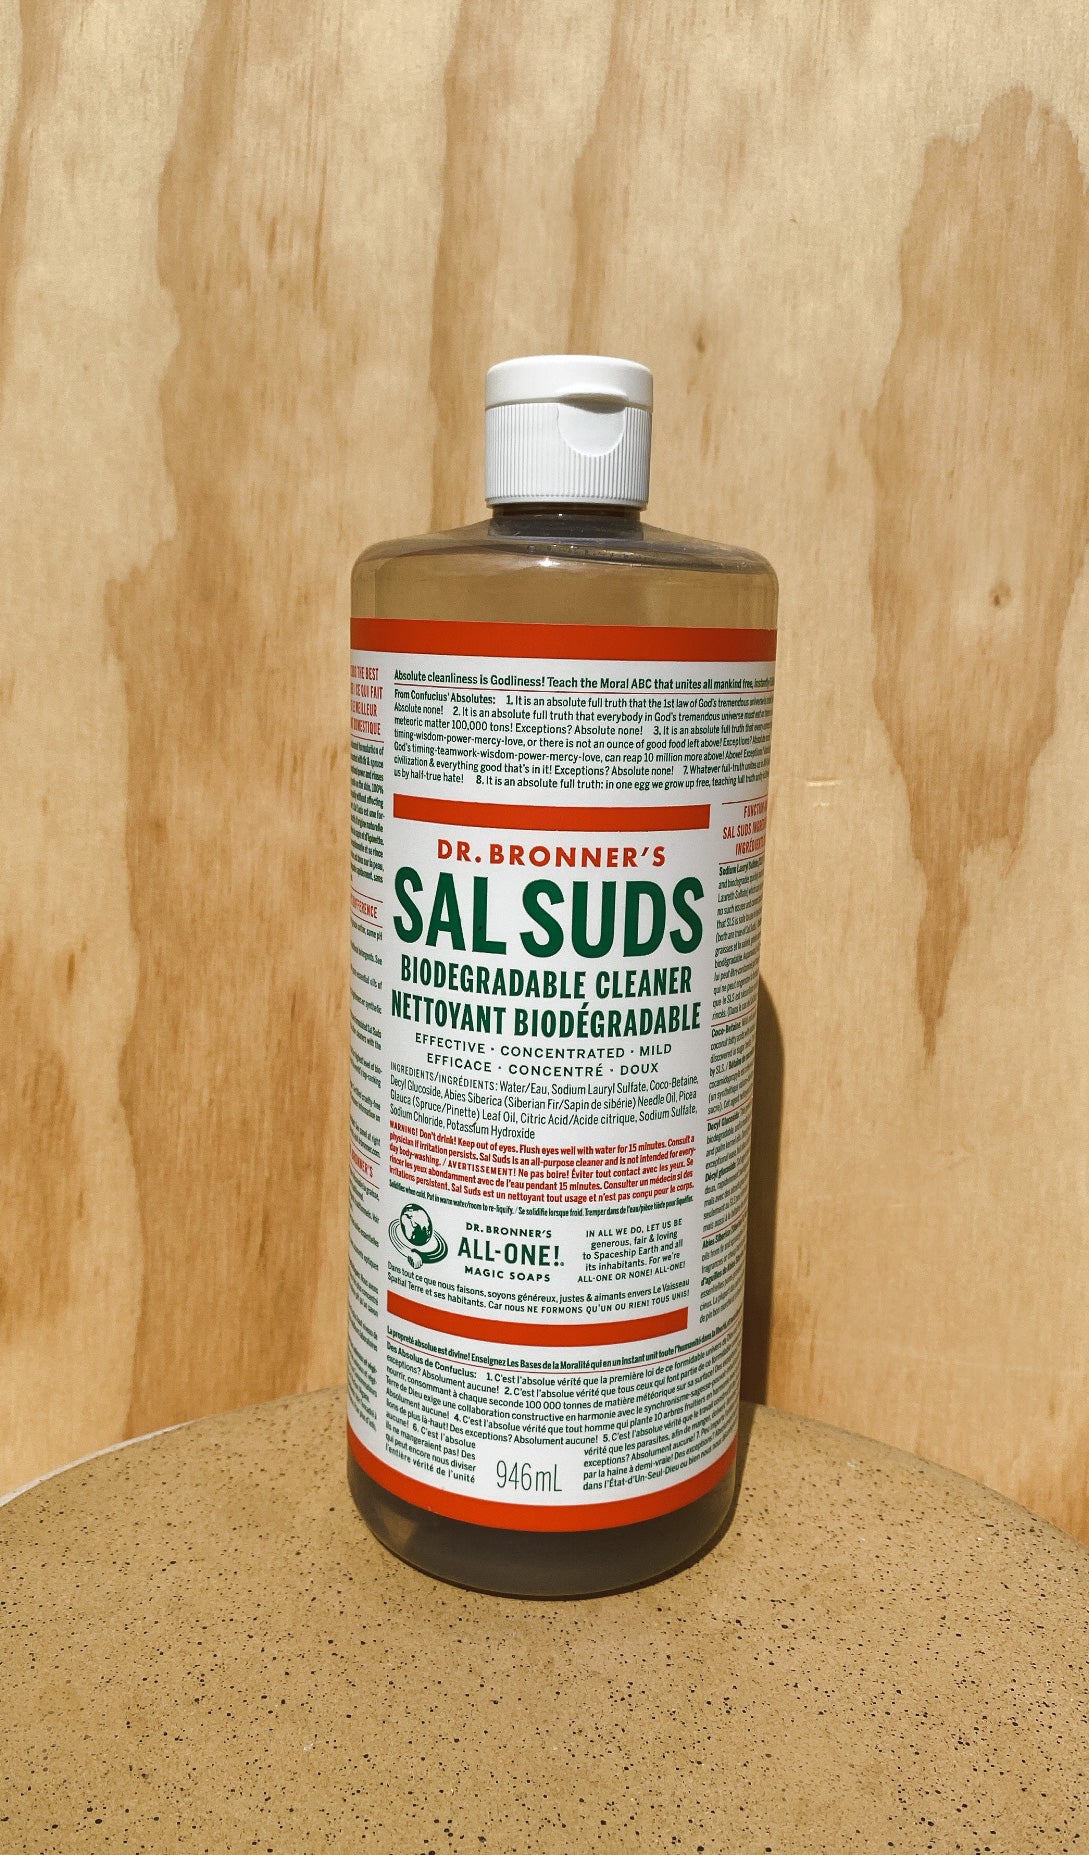 Top 5 uses for Dr Bronner's Sal Suds, Is Sal Suds Safe?